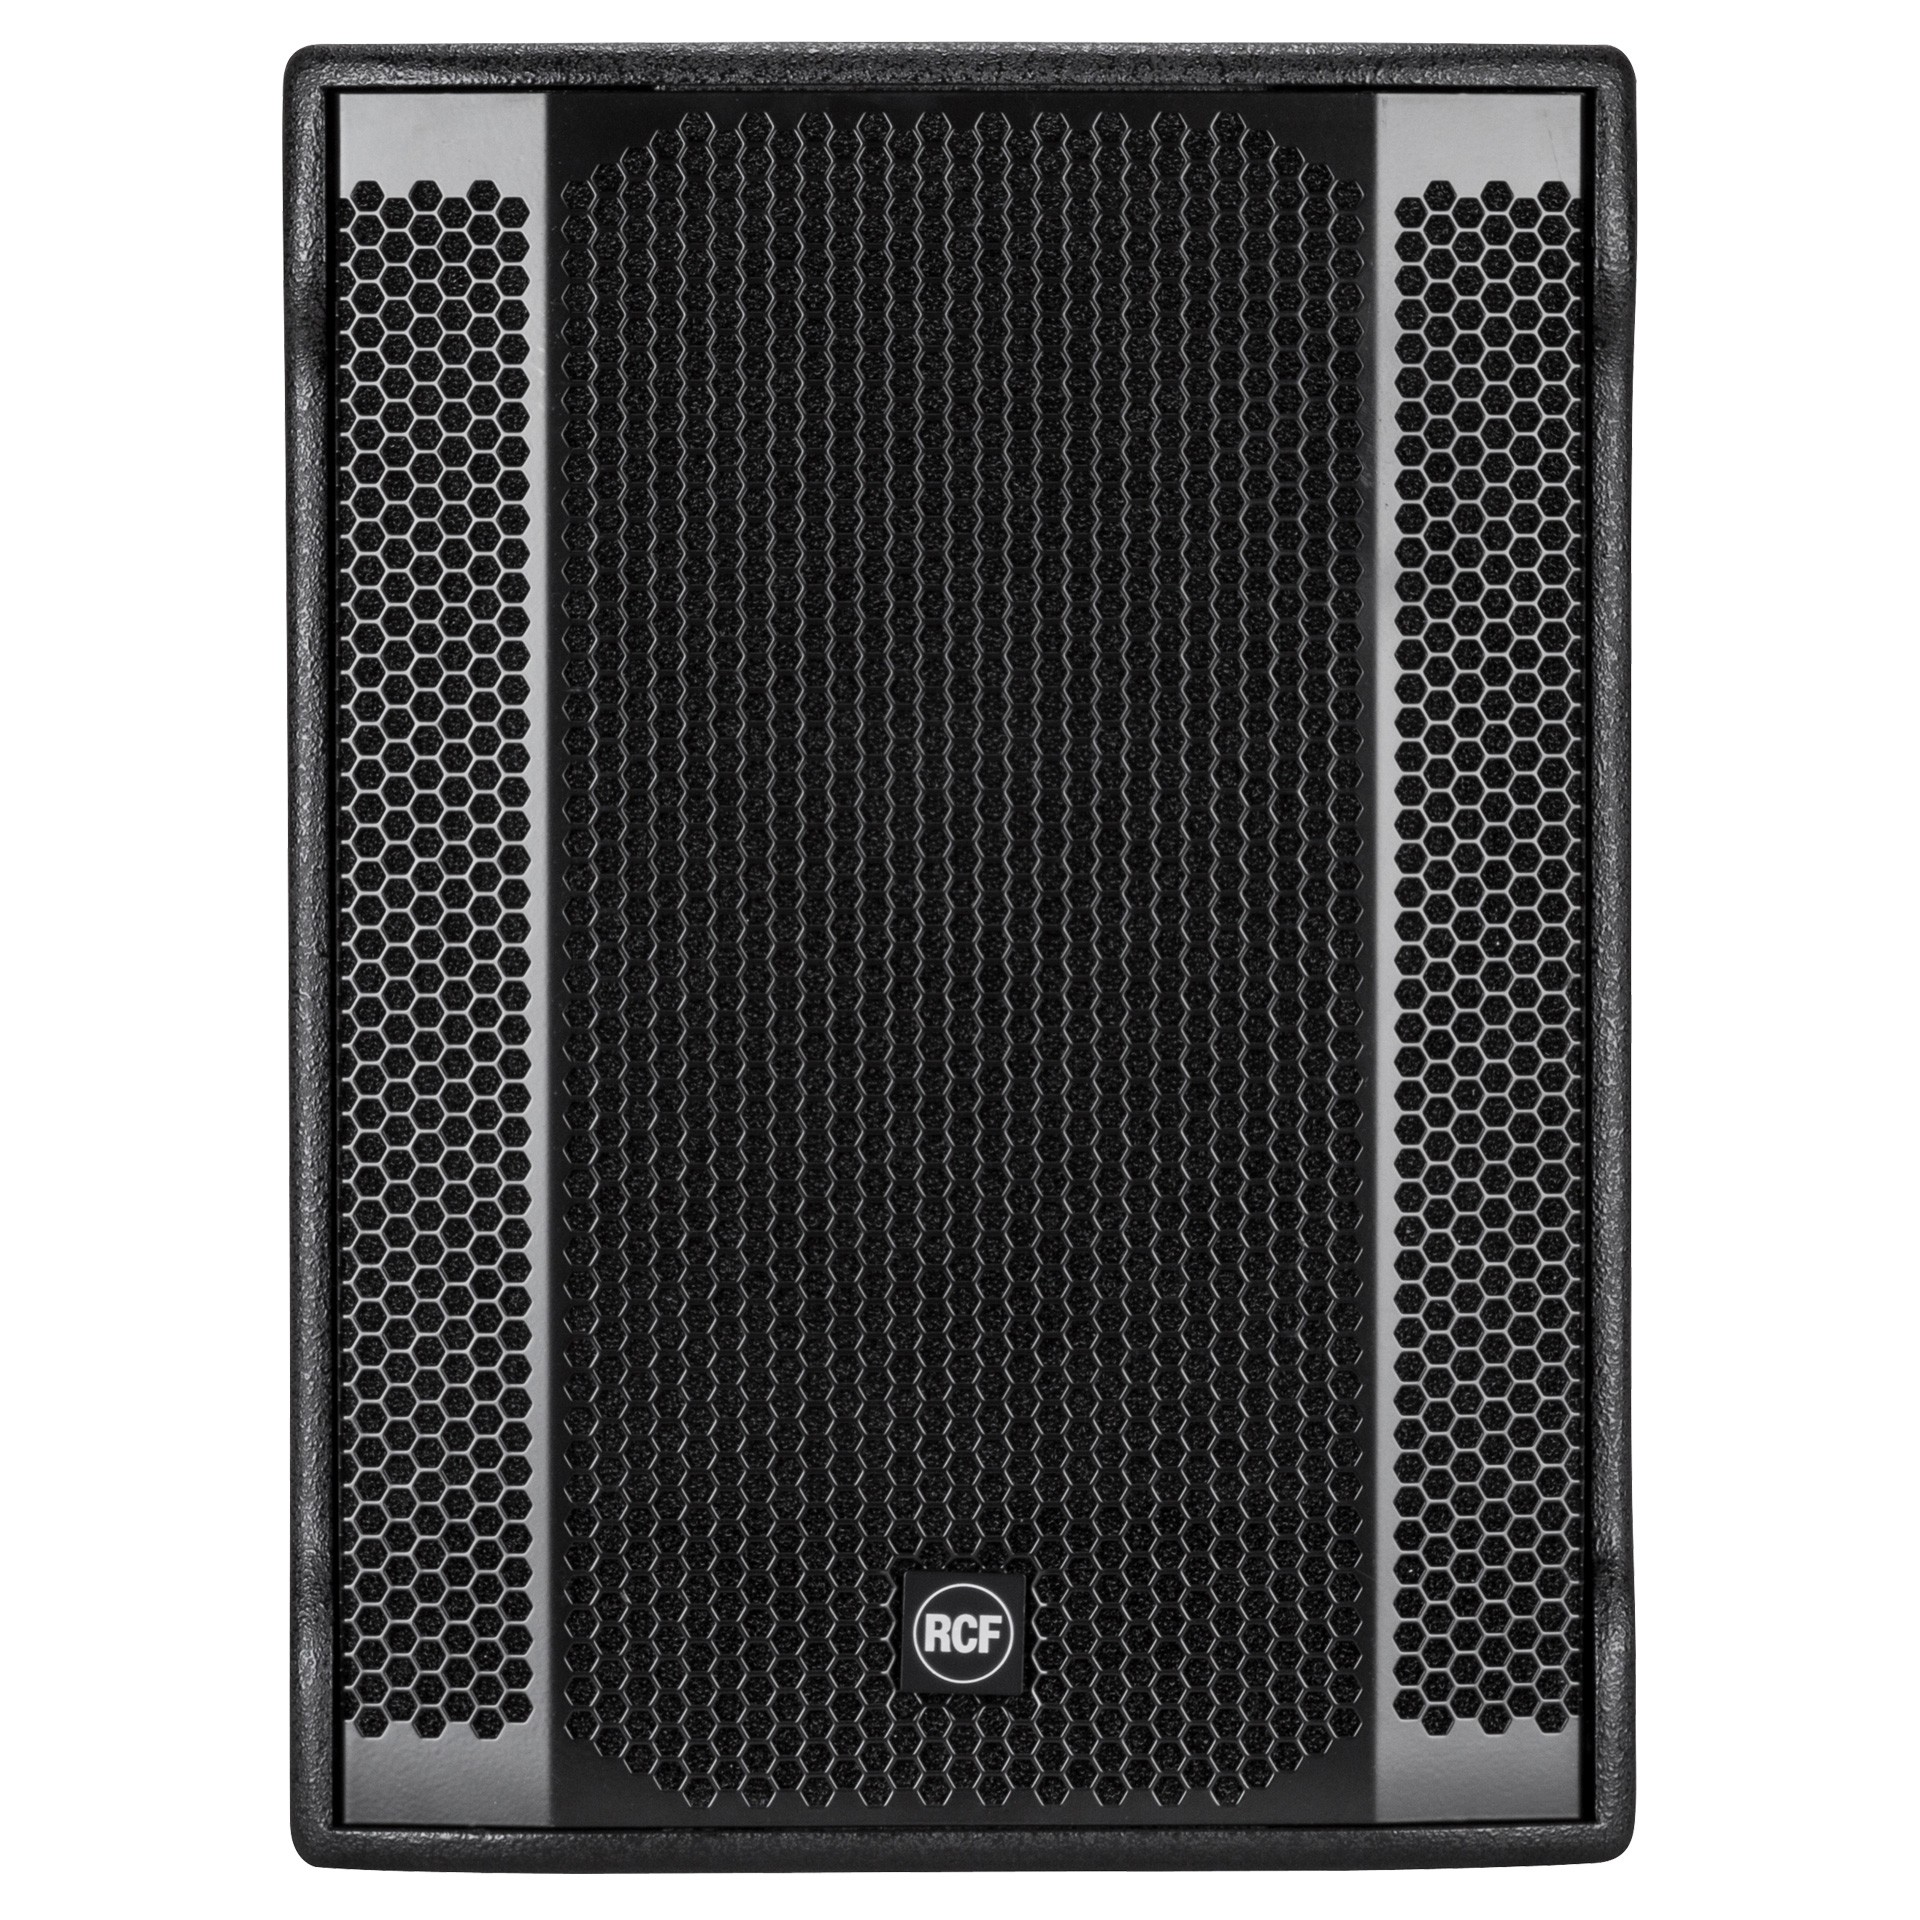 Subwoofere pro - Subwoofer activ RCF SUB 8003-AS II, audioclub.ro